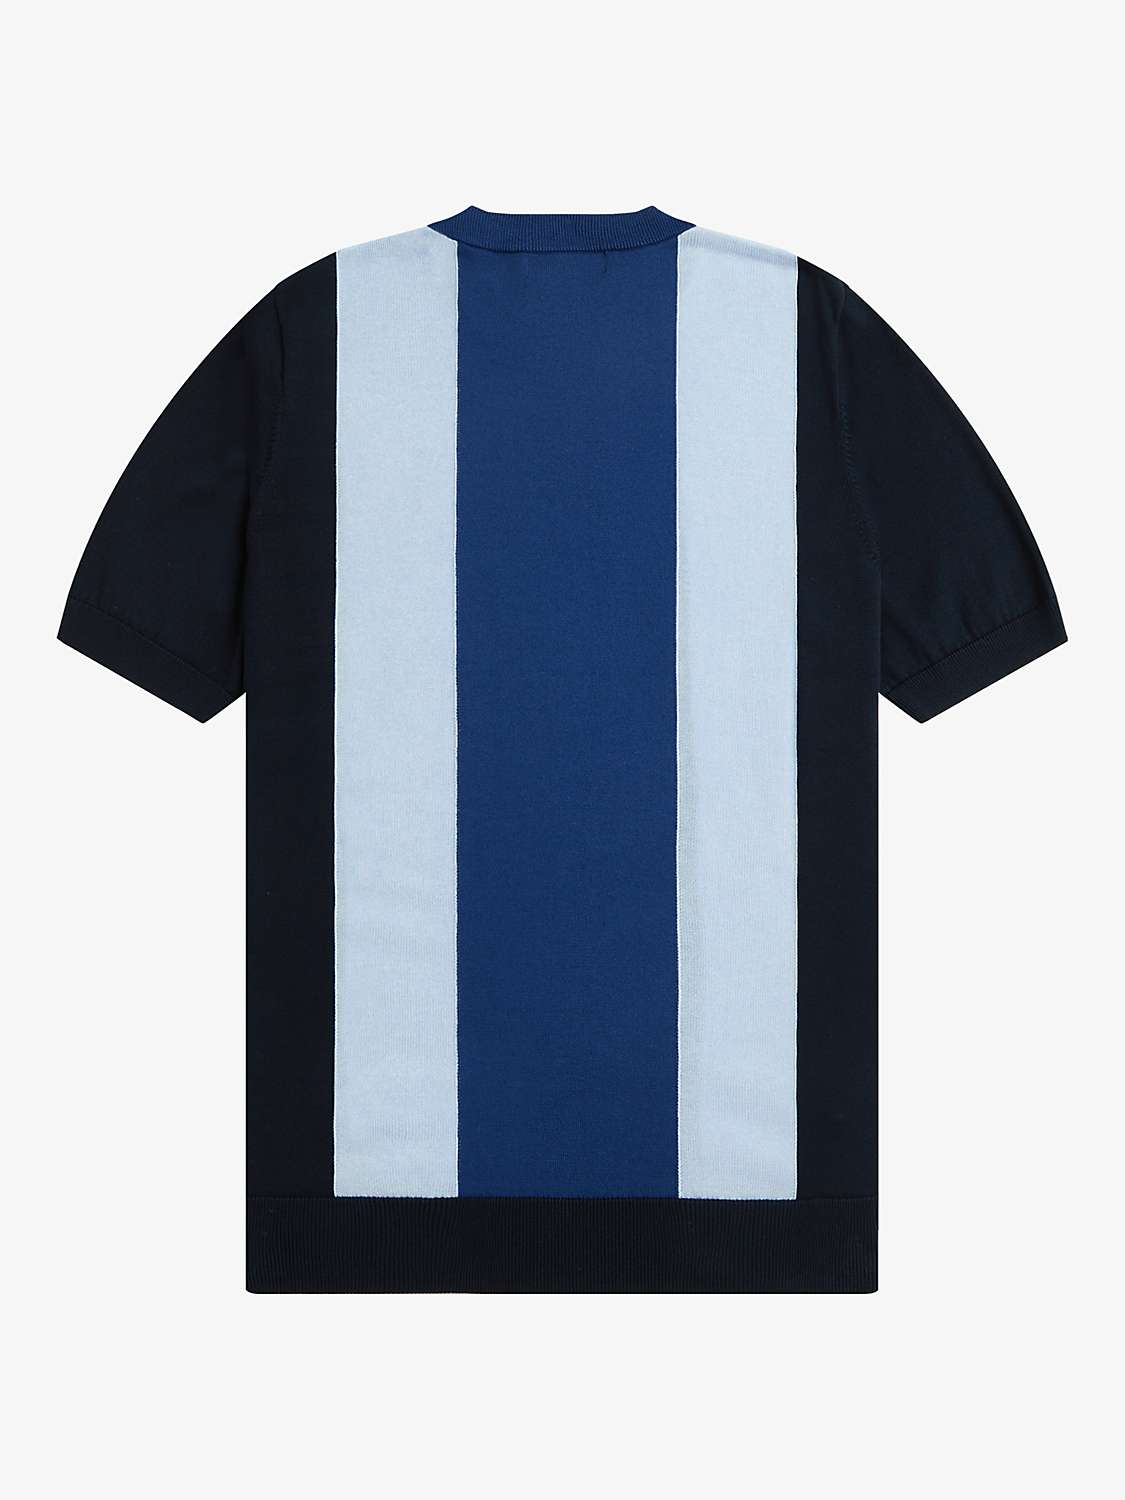 Buy Fred Perry Short Sleeve T-Shirt, Navy/Multi Online at johnlewis.com